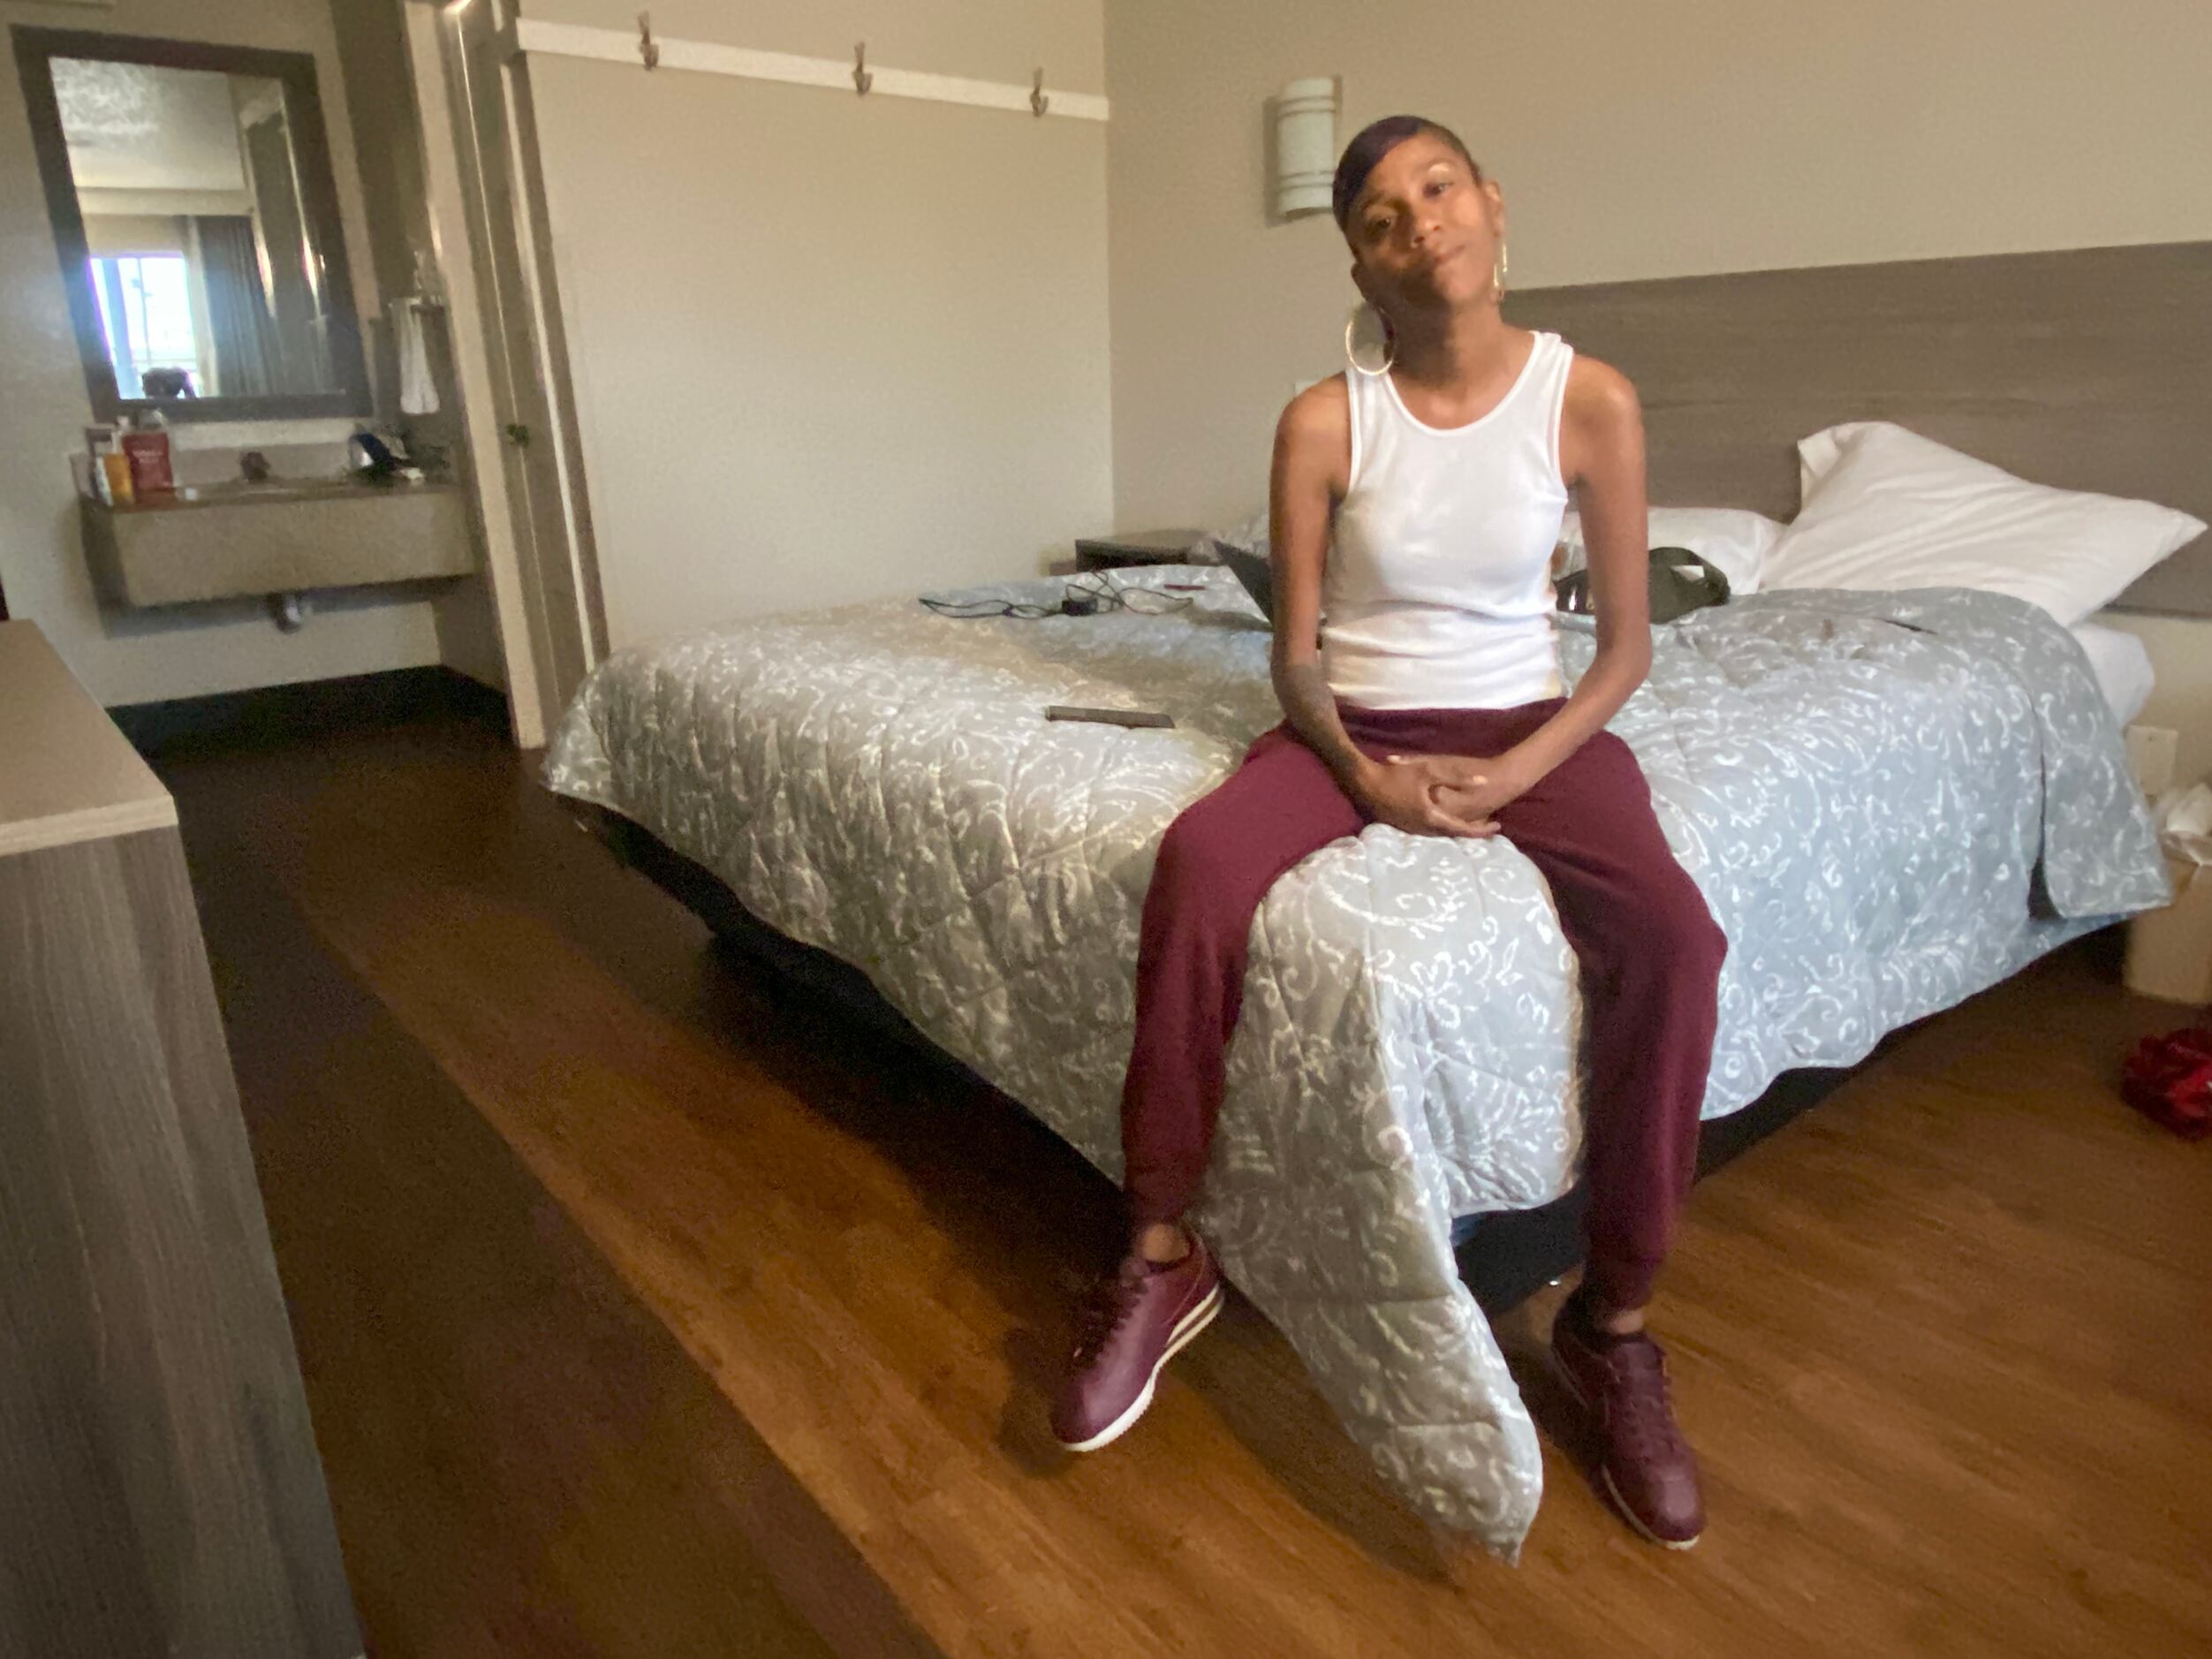 Brittany Jones, 41, sits on her bed at the Budget Inn of Texas in Mesquite. Like other...